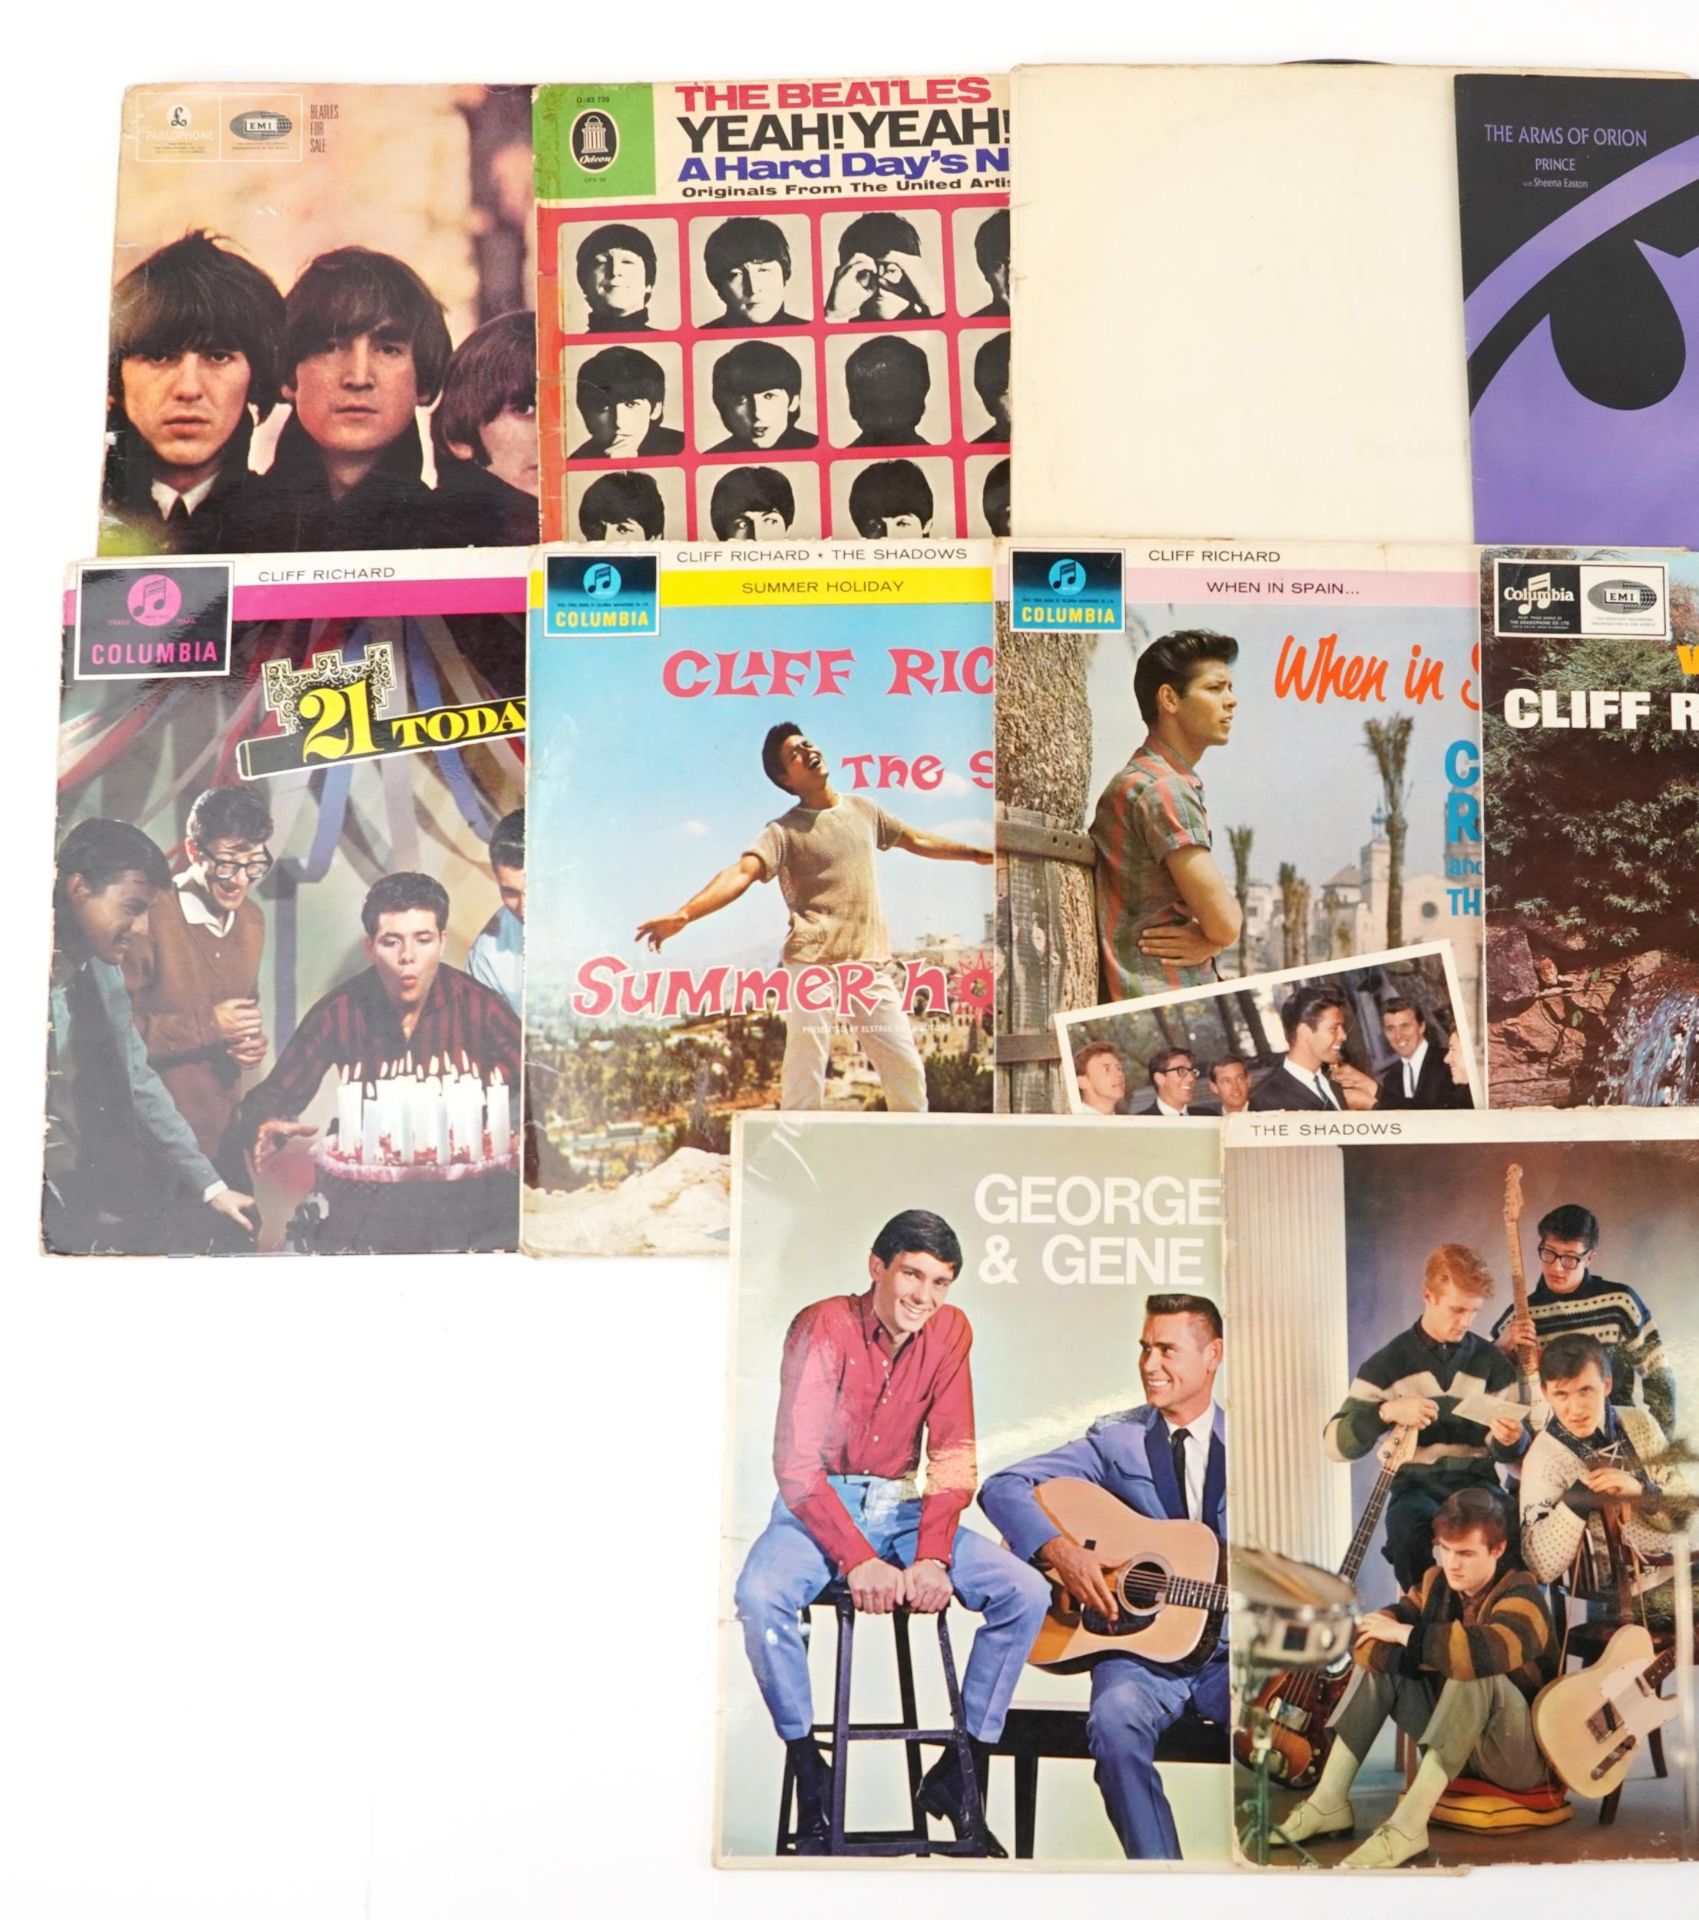 Vinyl LP records including The Beatles and Cliff Richard : For further information on this lot - Image 2 of 3